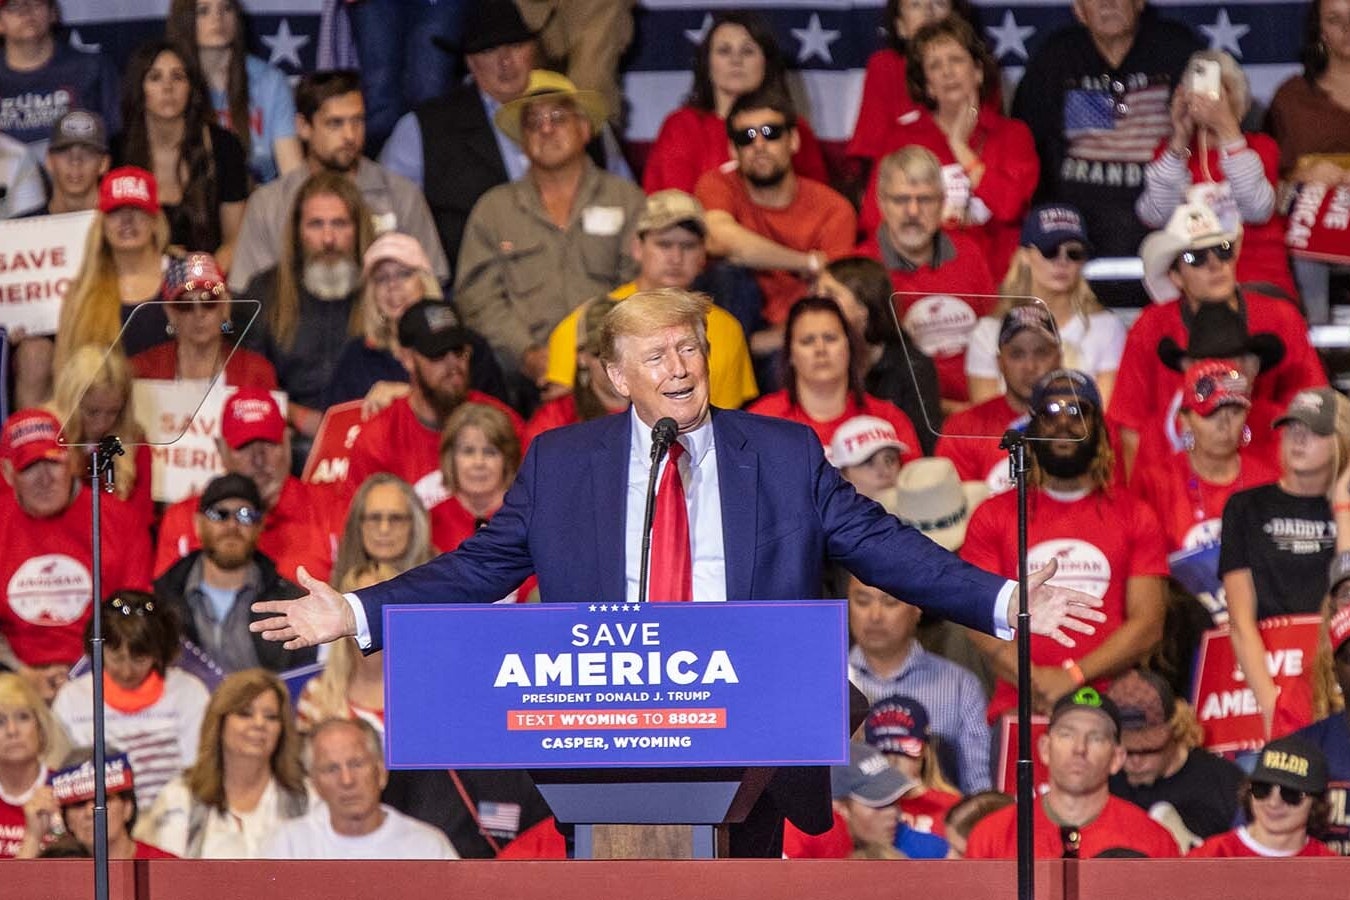 Former President Donald Trump addresses an enthusiastic crowd in Casper, Wyoming, in May 2022 during a rally in this file photo.